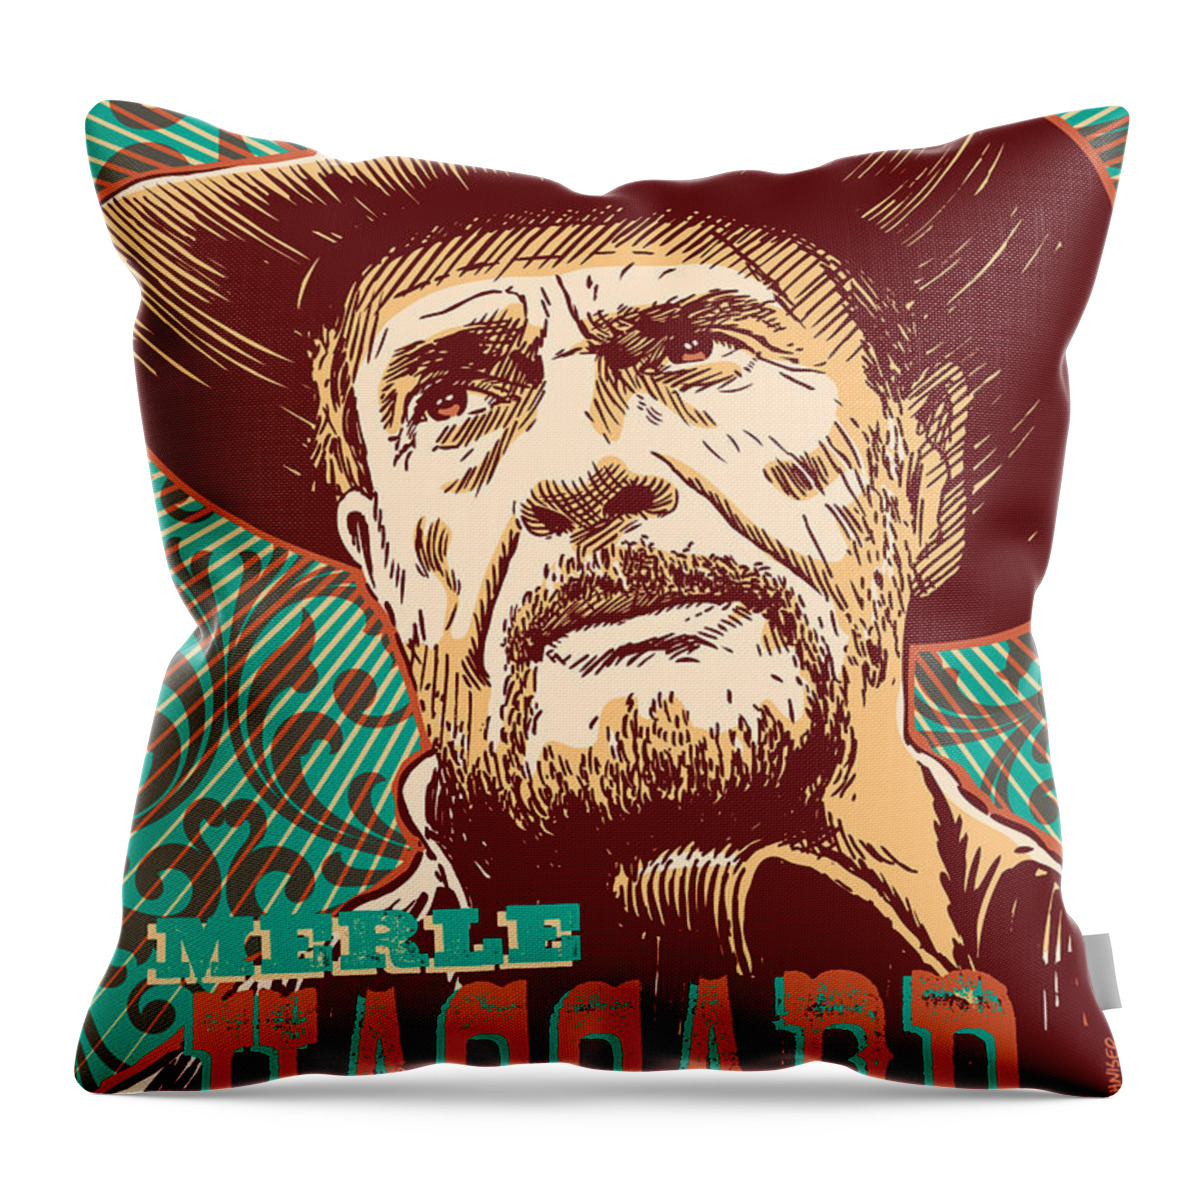 Country And Western Throw Pillow featuring the digital art Merle Haggard Pop Art by Jim Zahniser